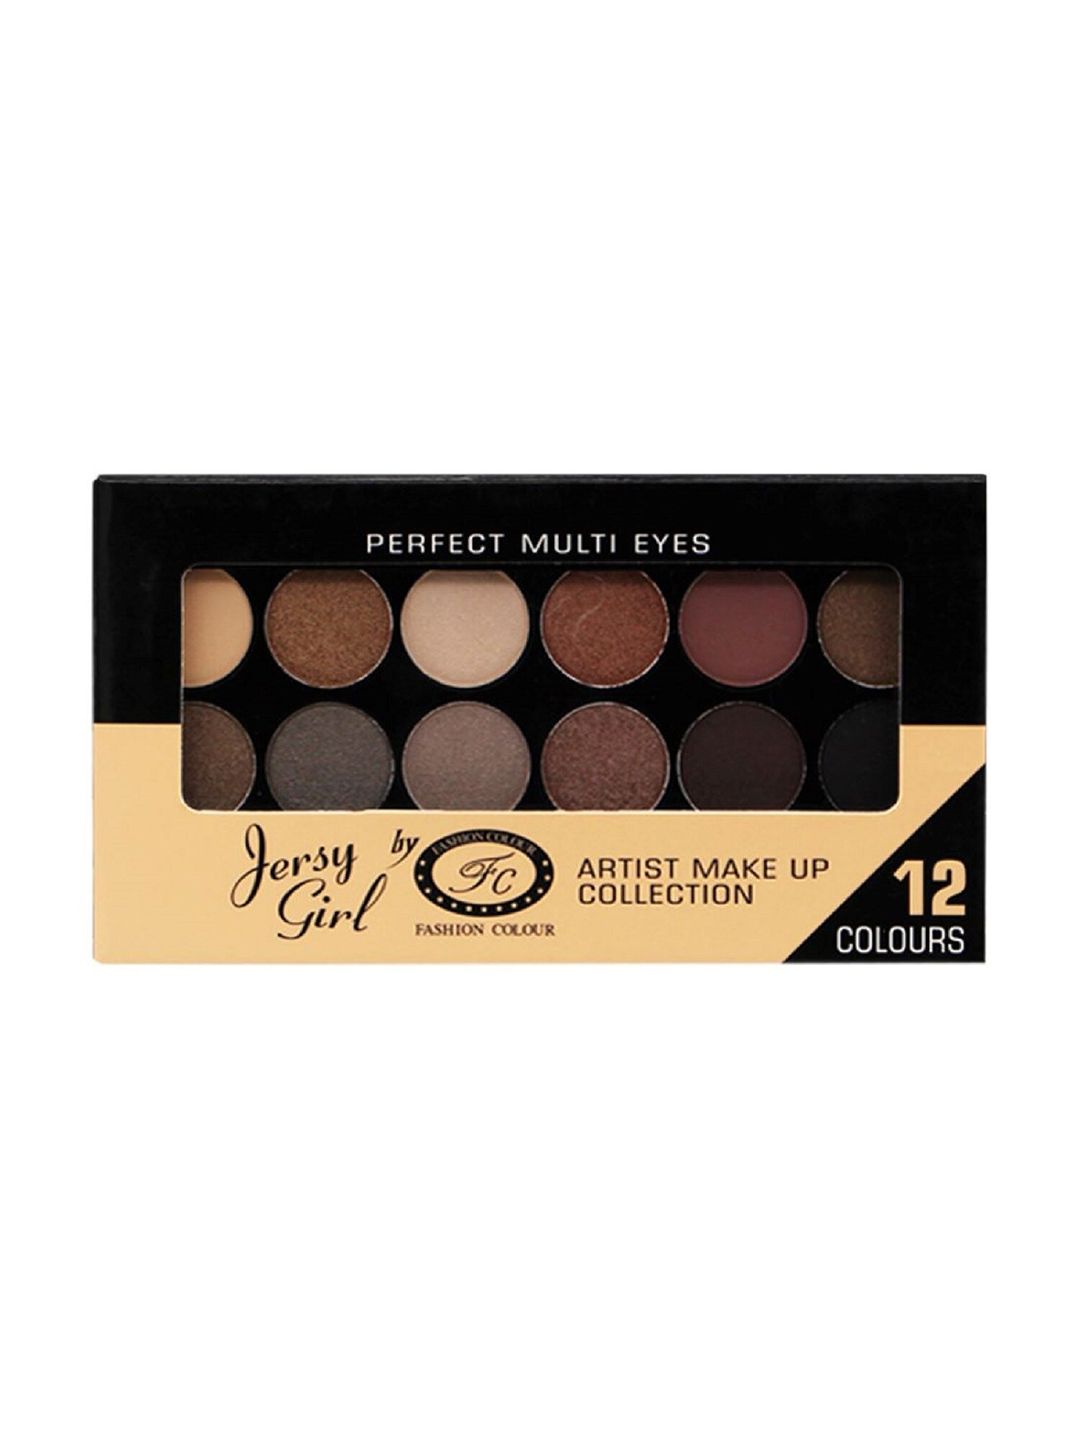 Fashion Colour Jersy Girl Artist Makeup Collection 12 Colours Eyeshadow Palette - Shade 03 Price in India